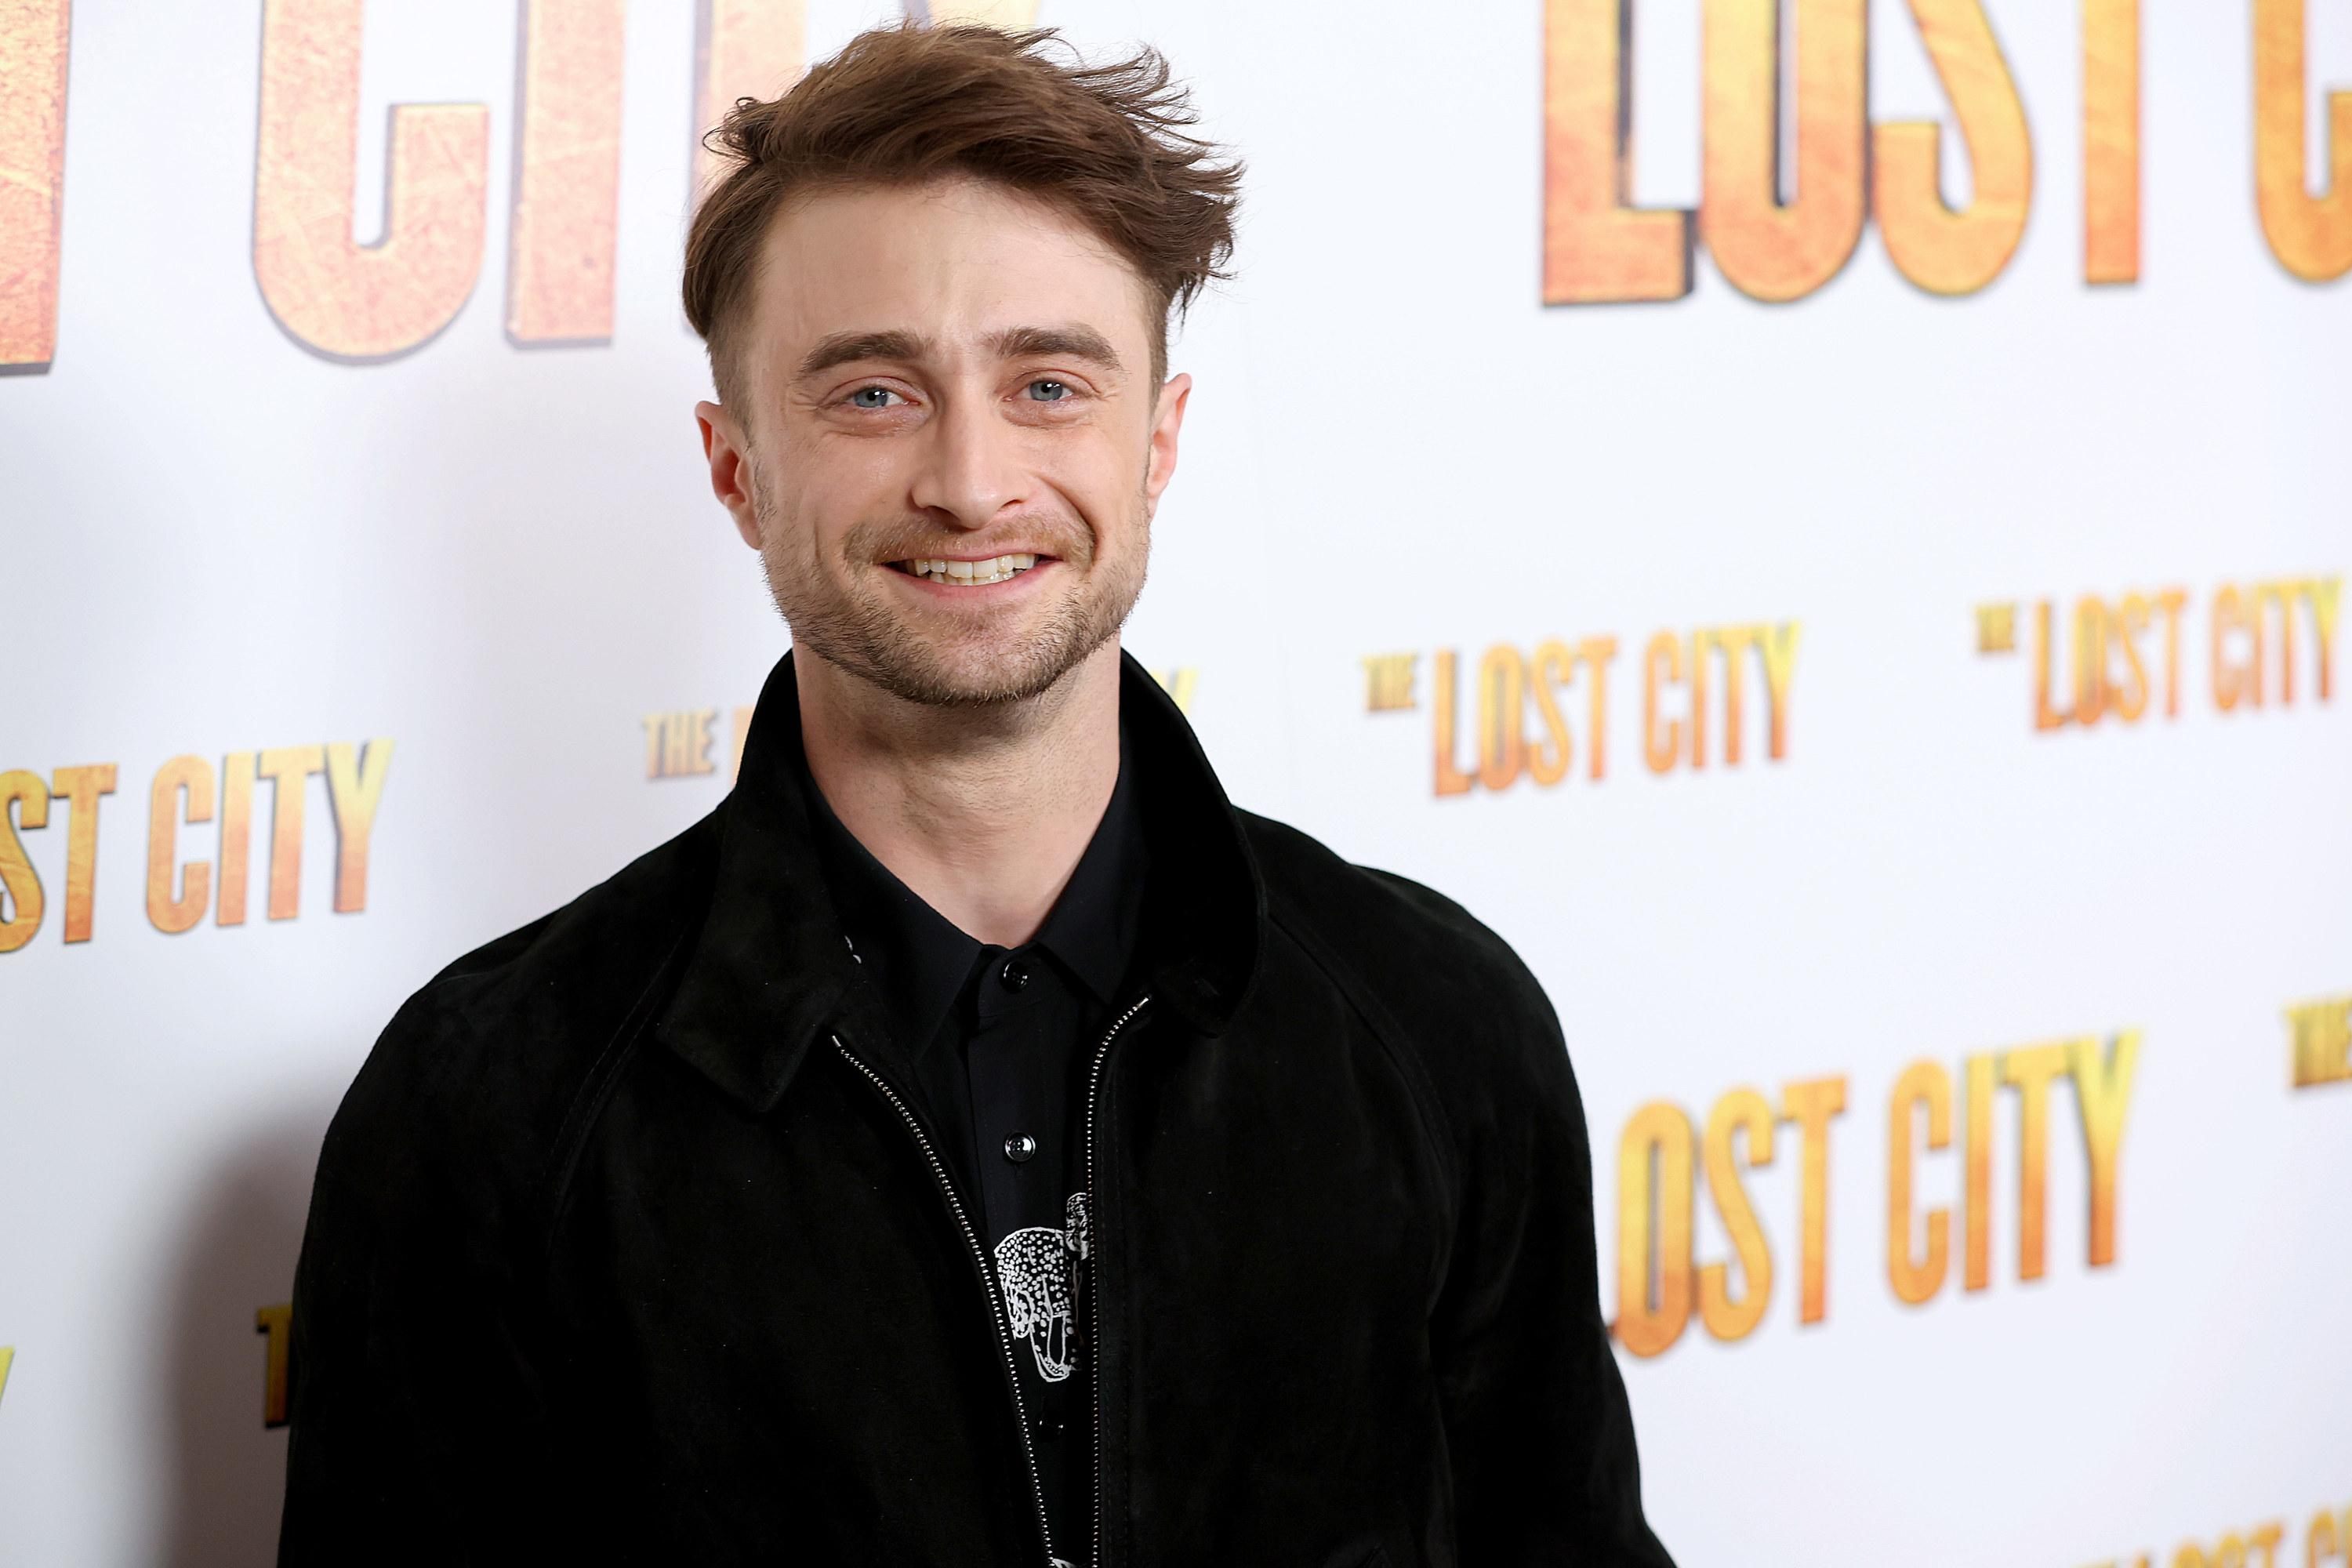 Daniel Radcliffe arrives at the &quot;Lost City&quot; screening on March 14, 2022